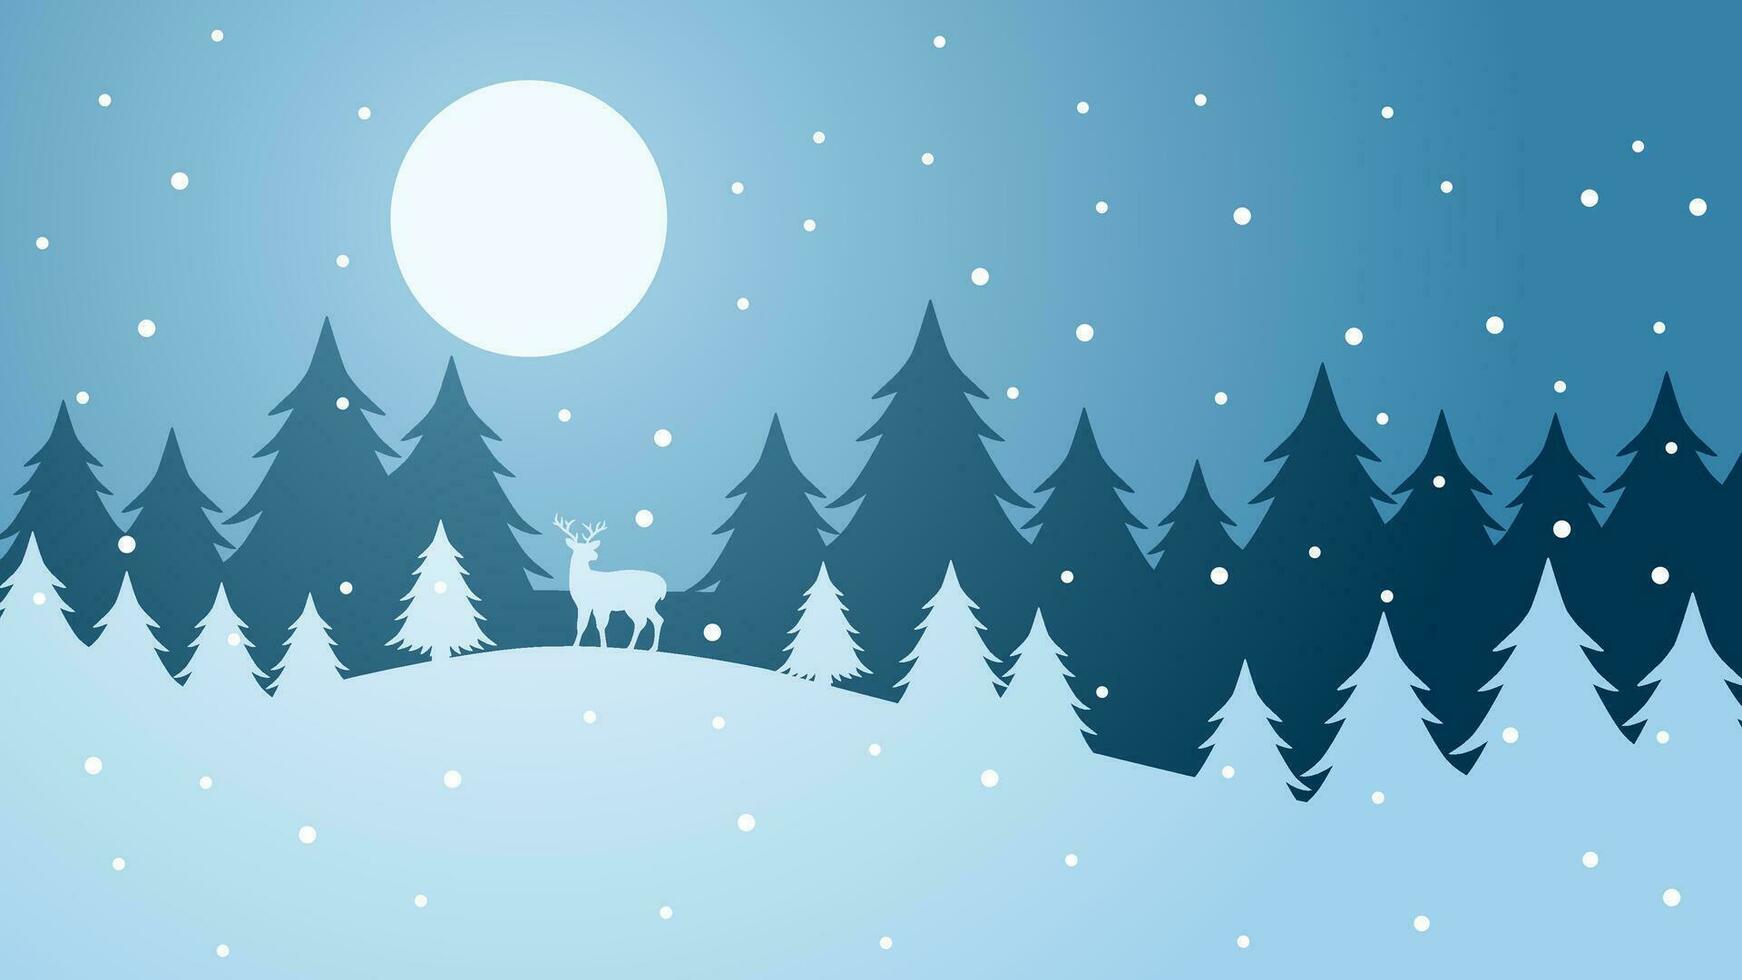 Winter silhouette landscape vector illustration. Scenery of reindeer silhouette in the pine forest snow hill. Cold season panorama for illustration, background or wallpaper